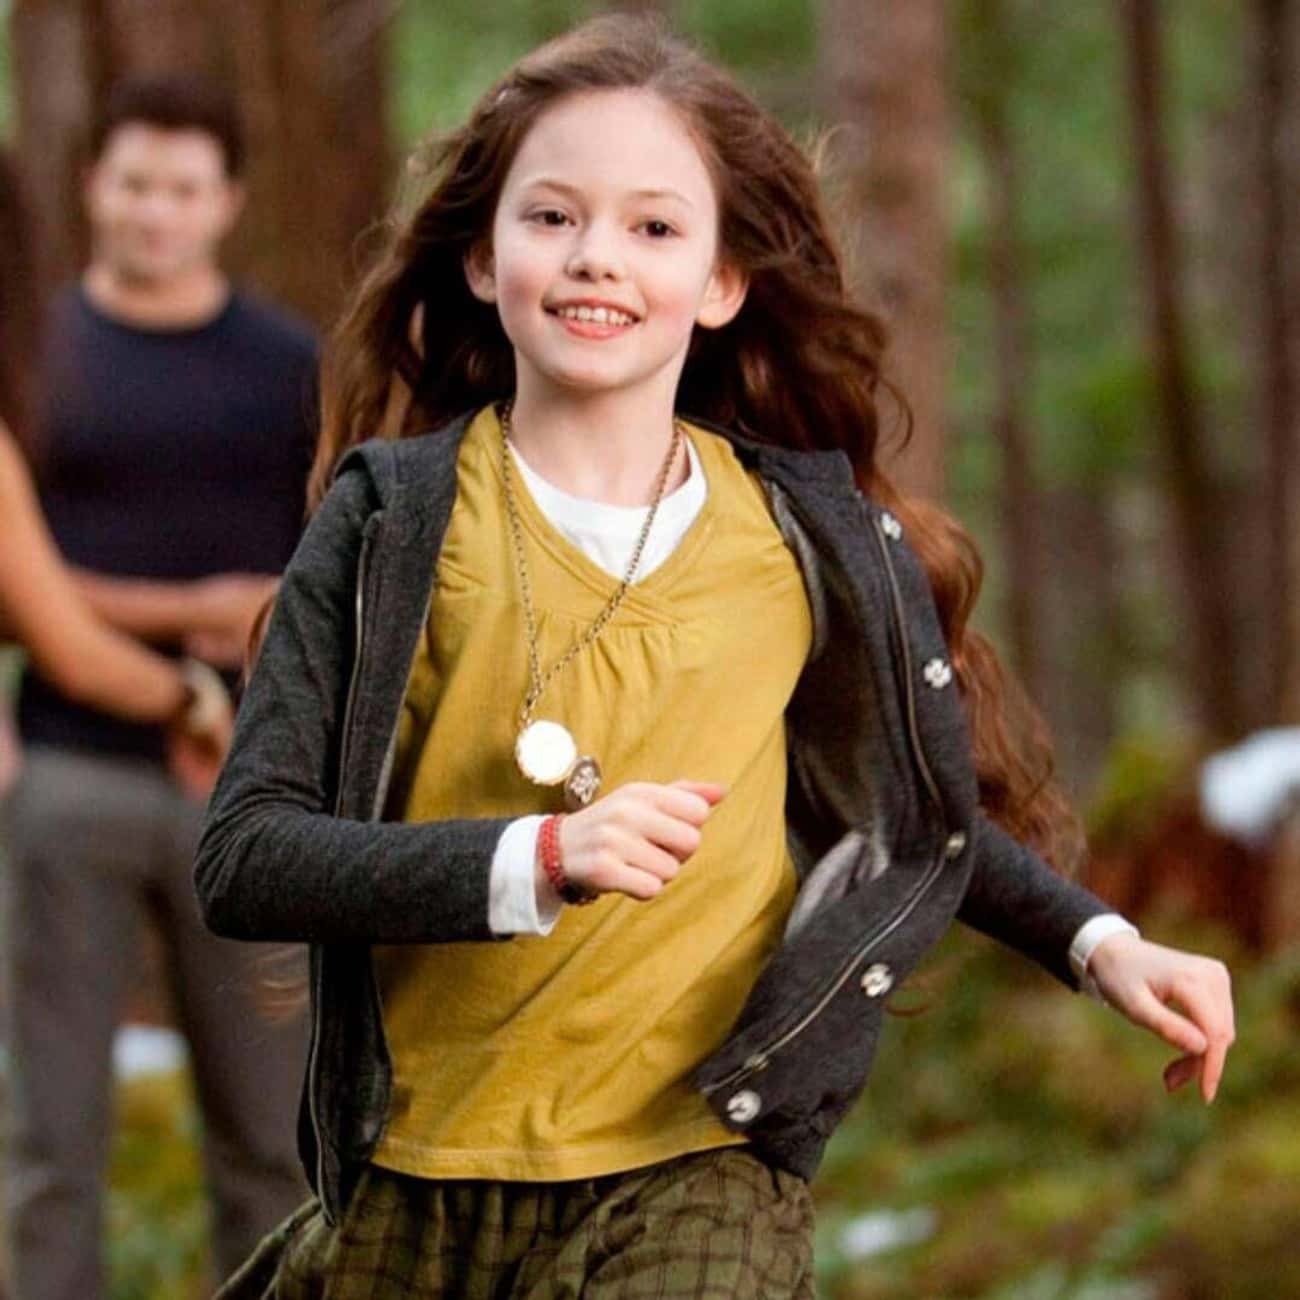 Being A Half Vampire Means Renesmee Won't Have The Same Capabilities As Her Family